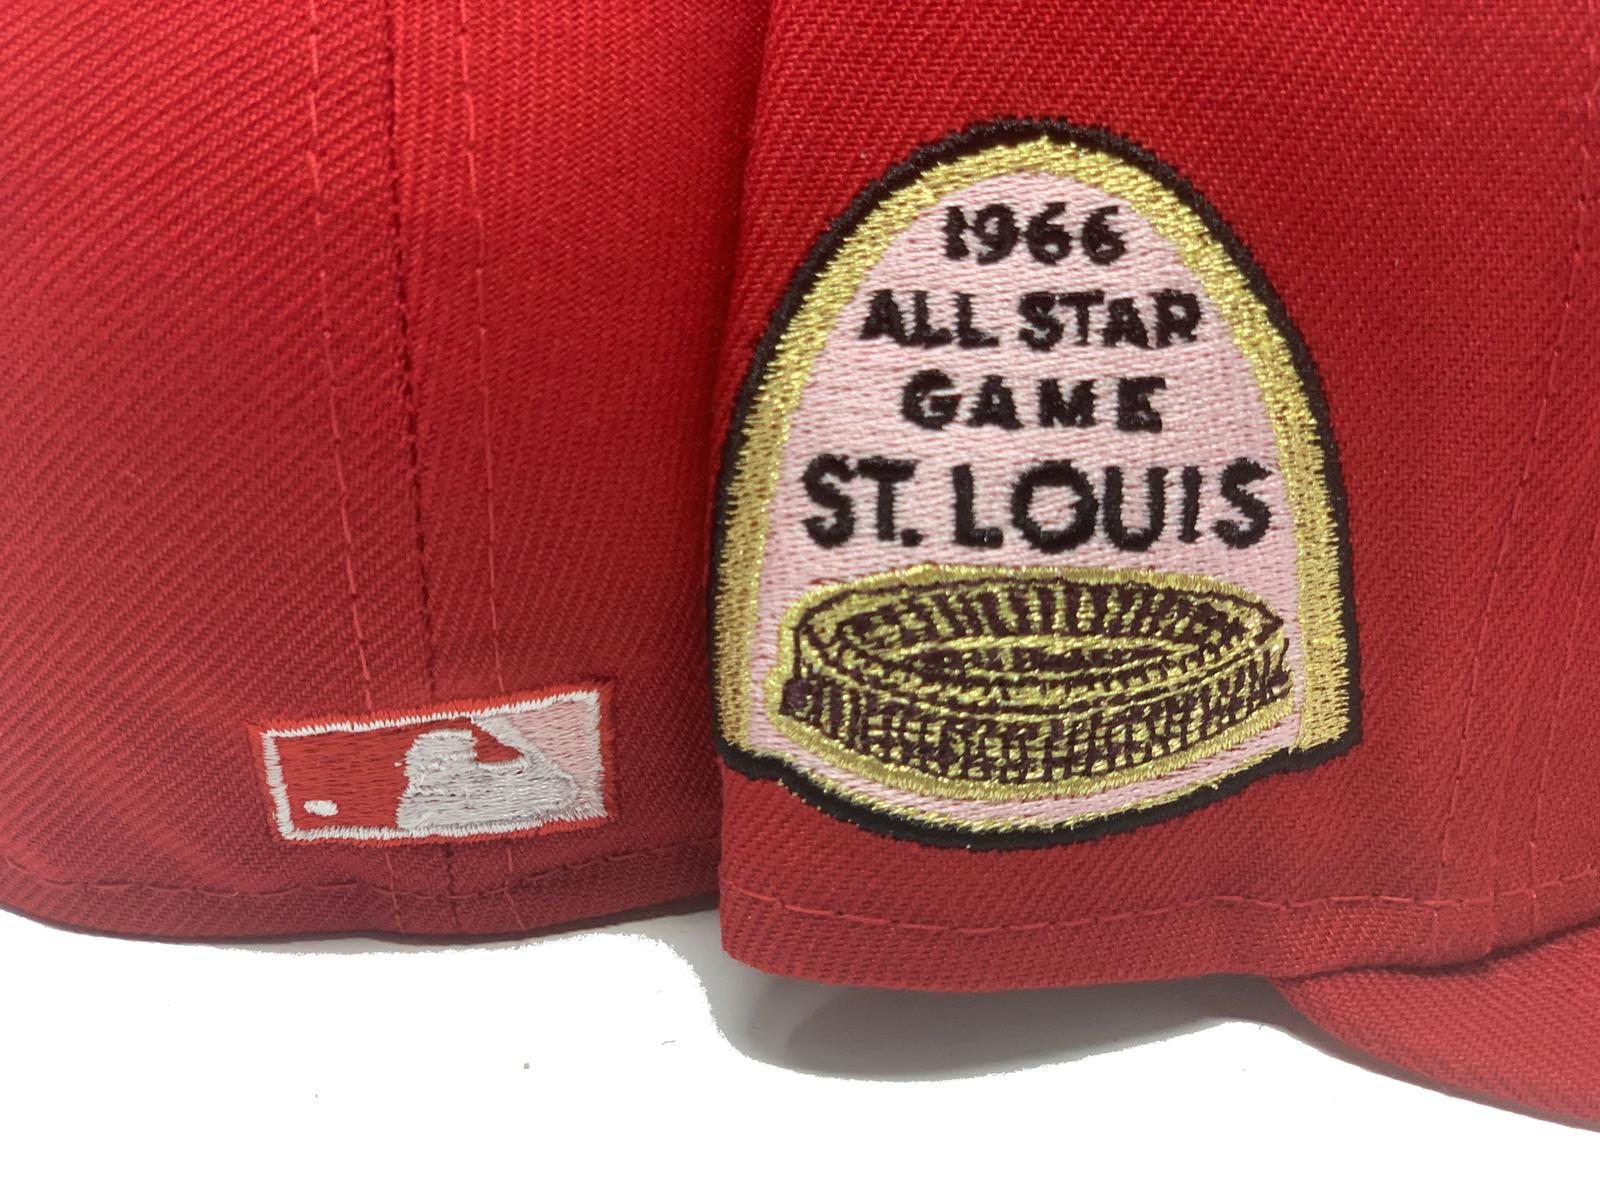 Red “All Star game” edition St. Louis Cardinals hat